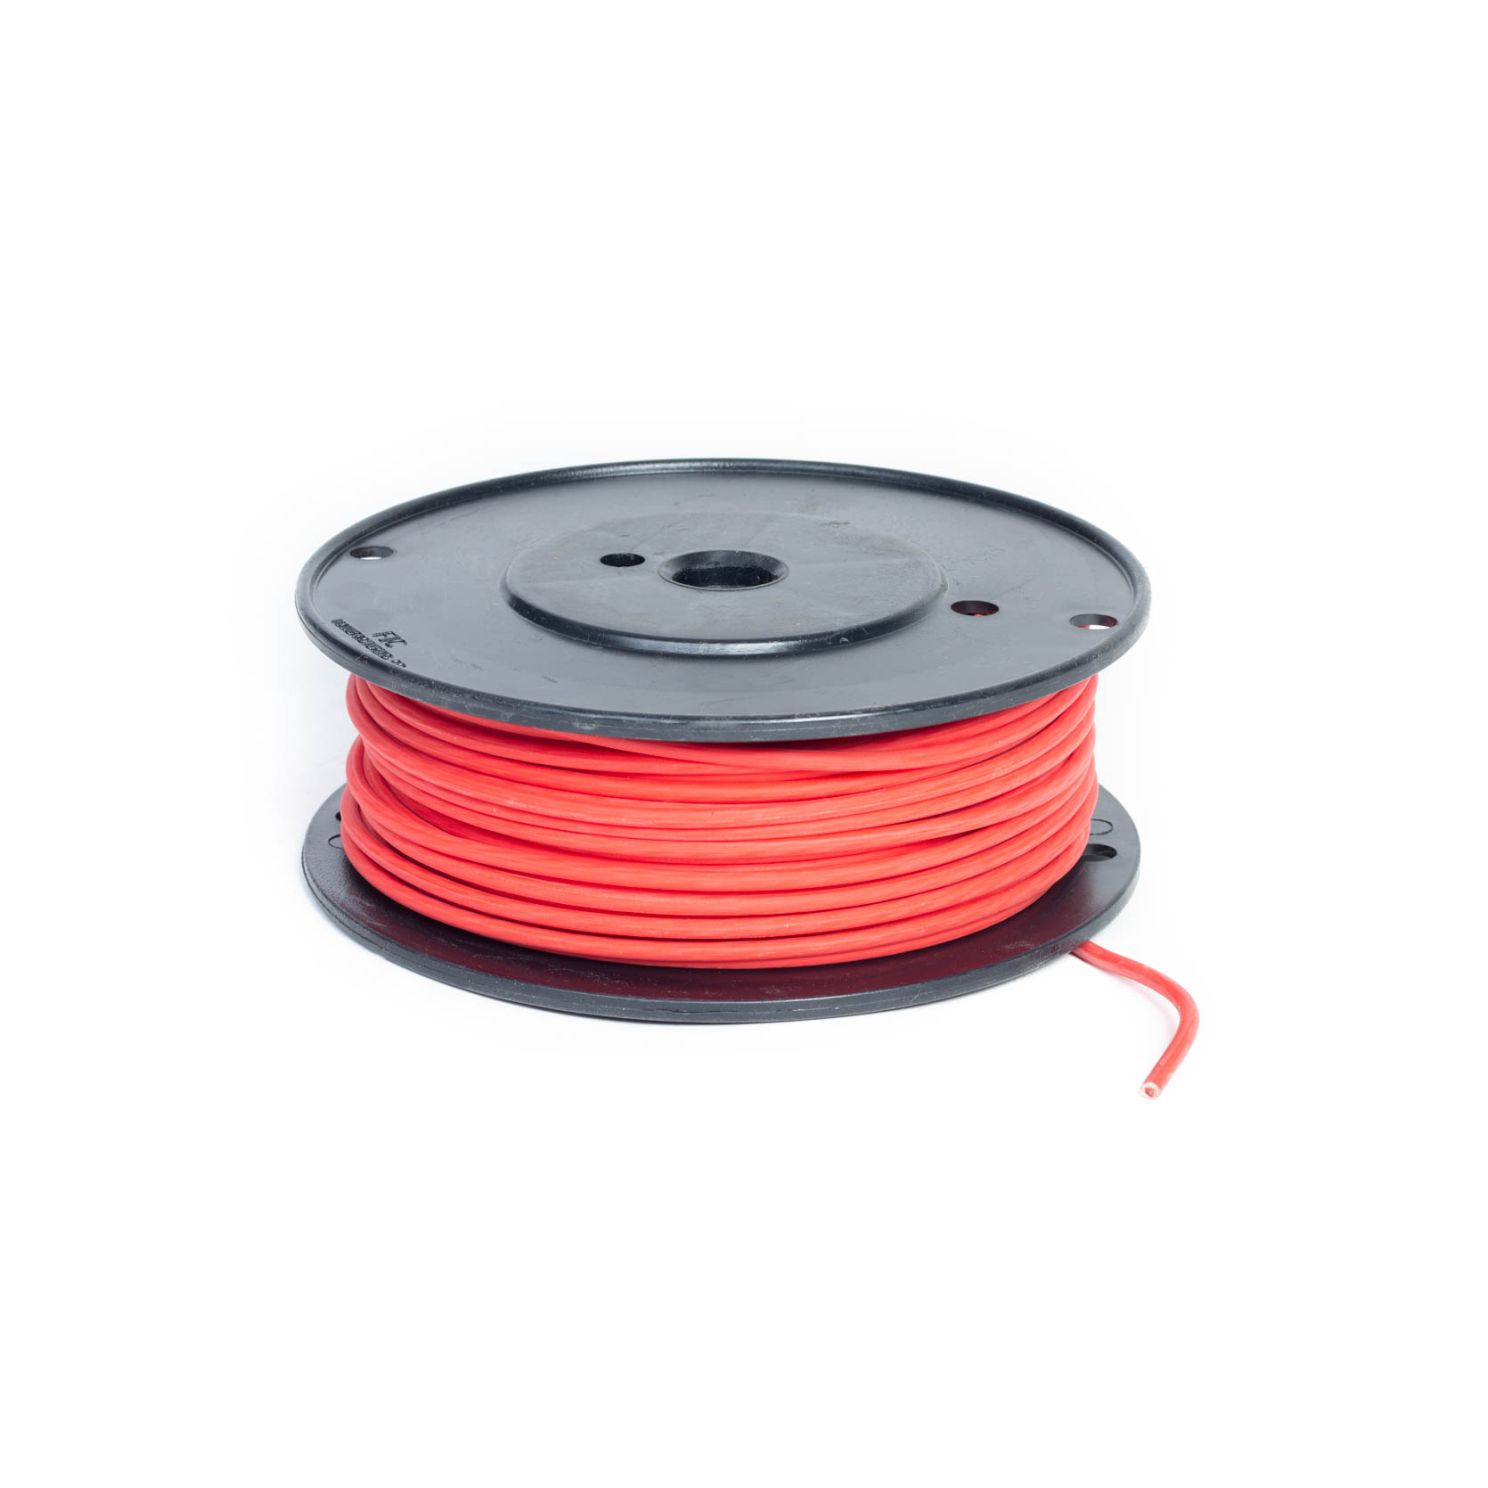 GXL12-2 Primary Red Conductor Wire 12-Gauge